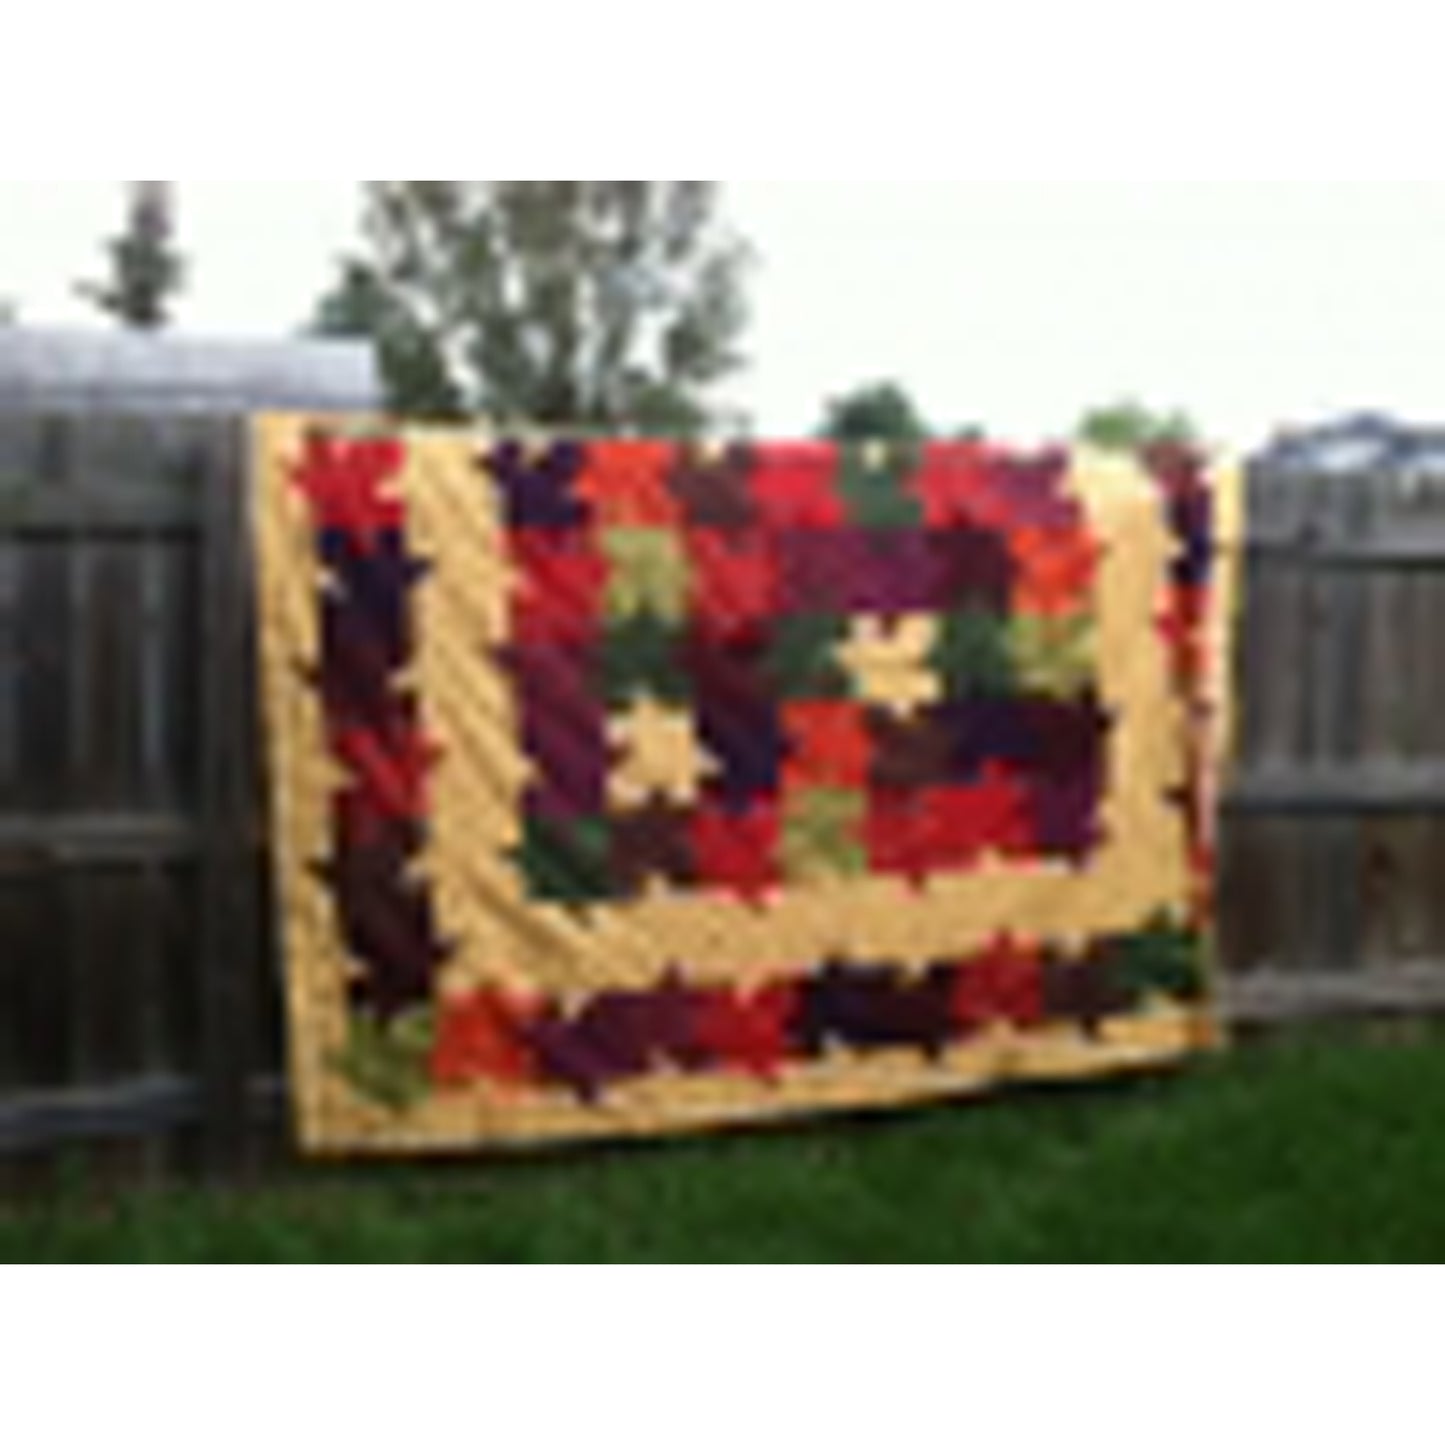 Quilt hanging over a fence. Beautiful quilt of colorful leaves on a tan background.